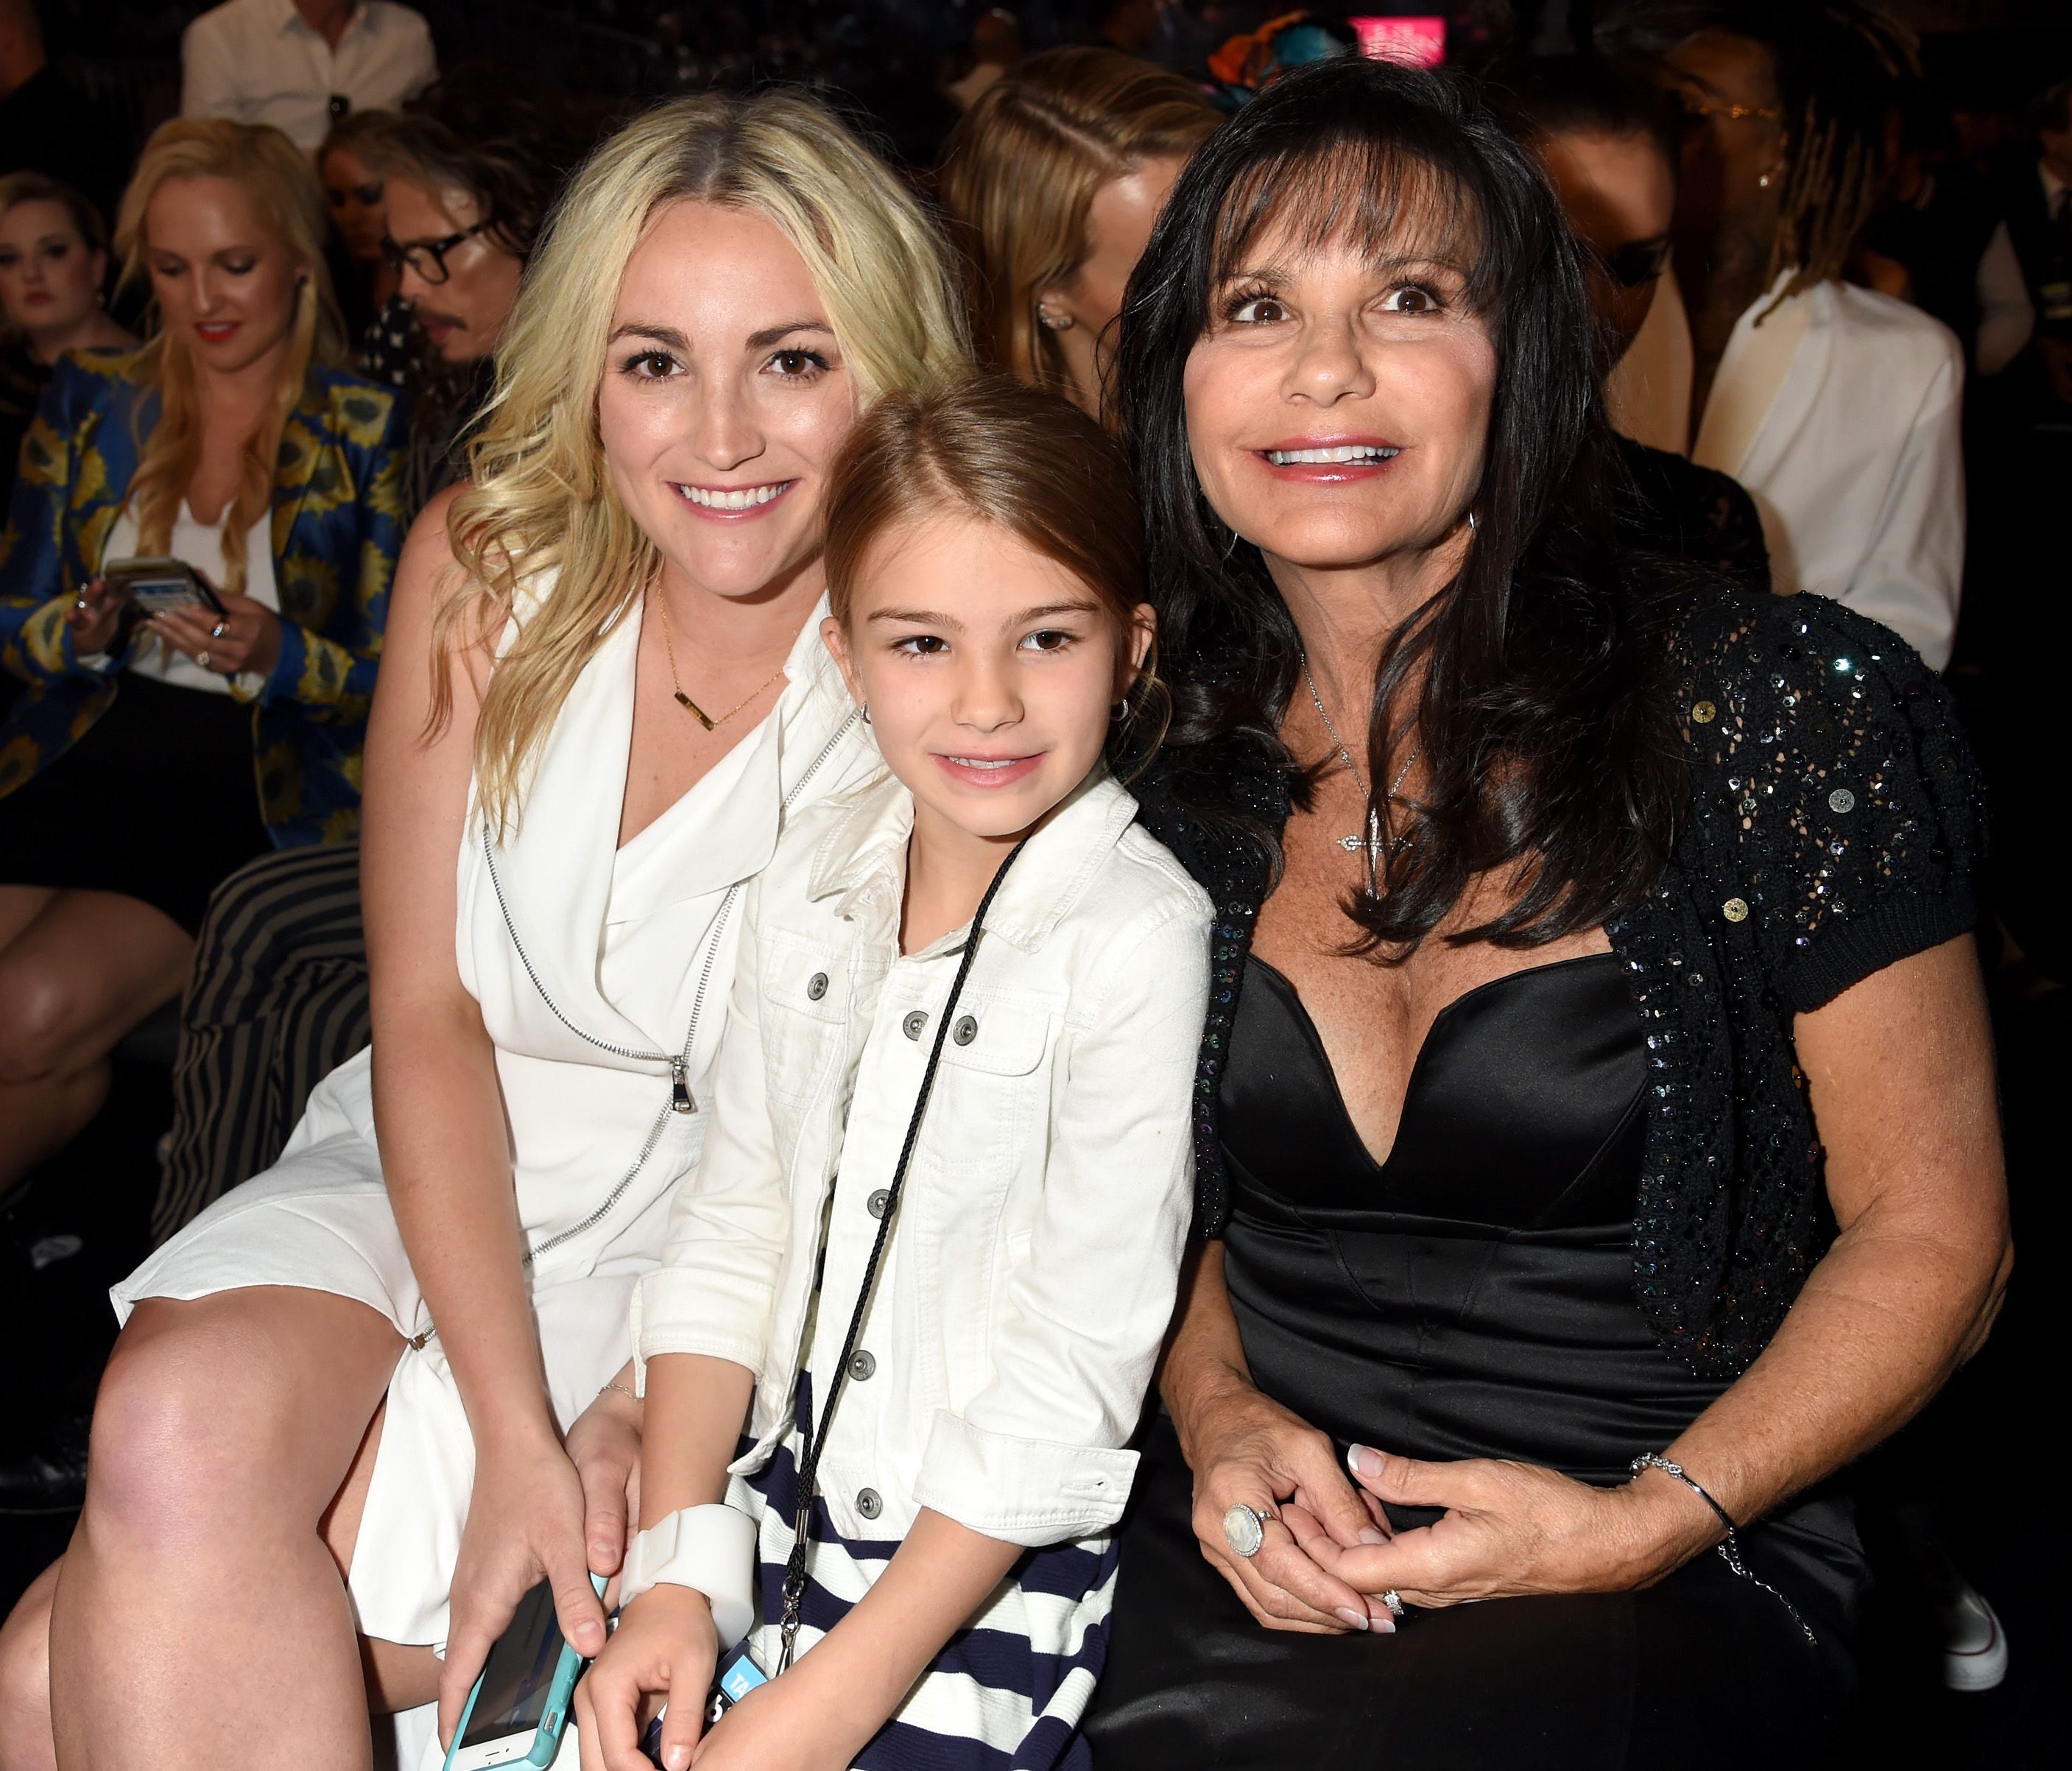 Jamie Lynn Spears' daughter Maddie has regained consciousness and does not appear to have suffered any neurological damage from driving an ATV into a pond.